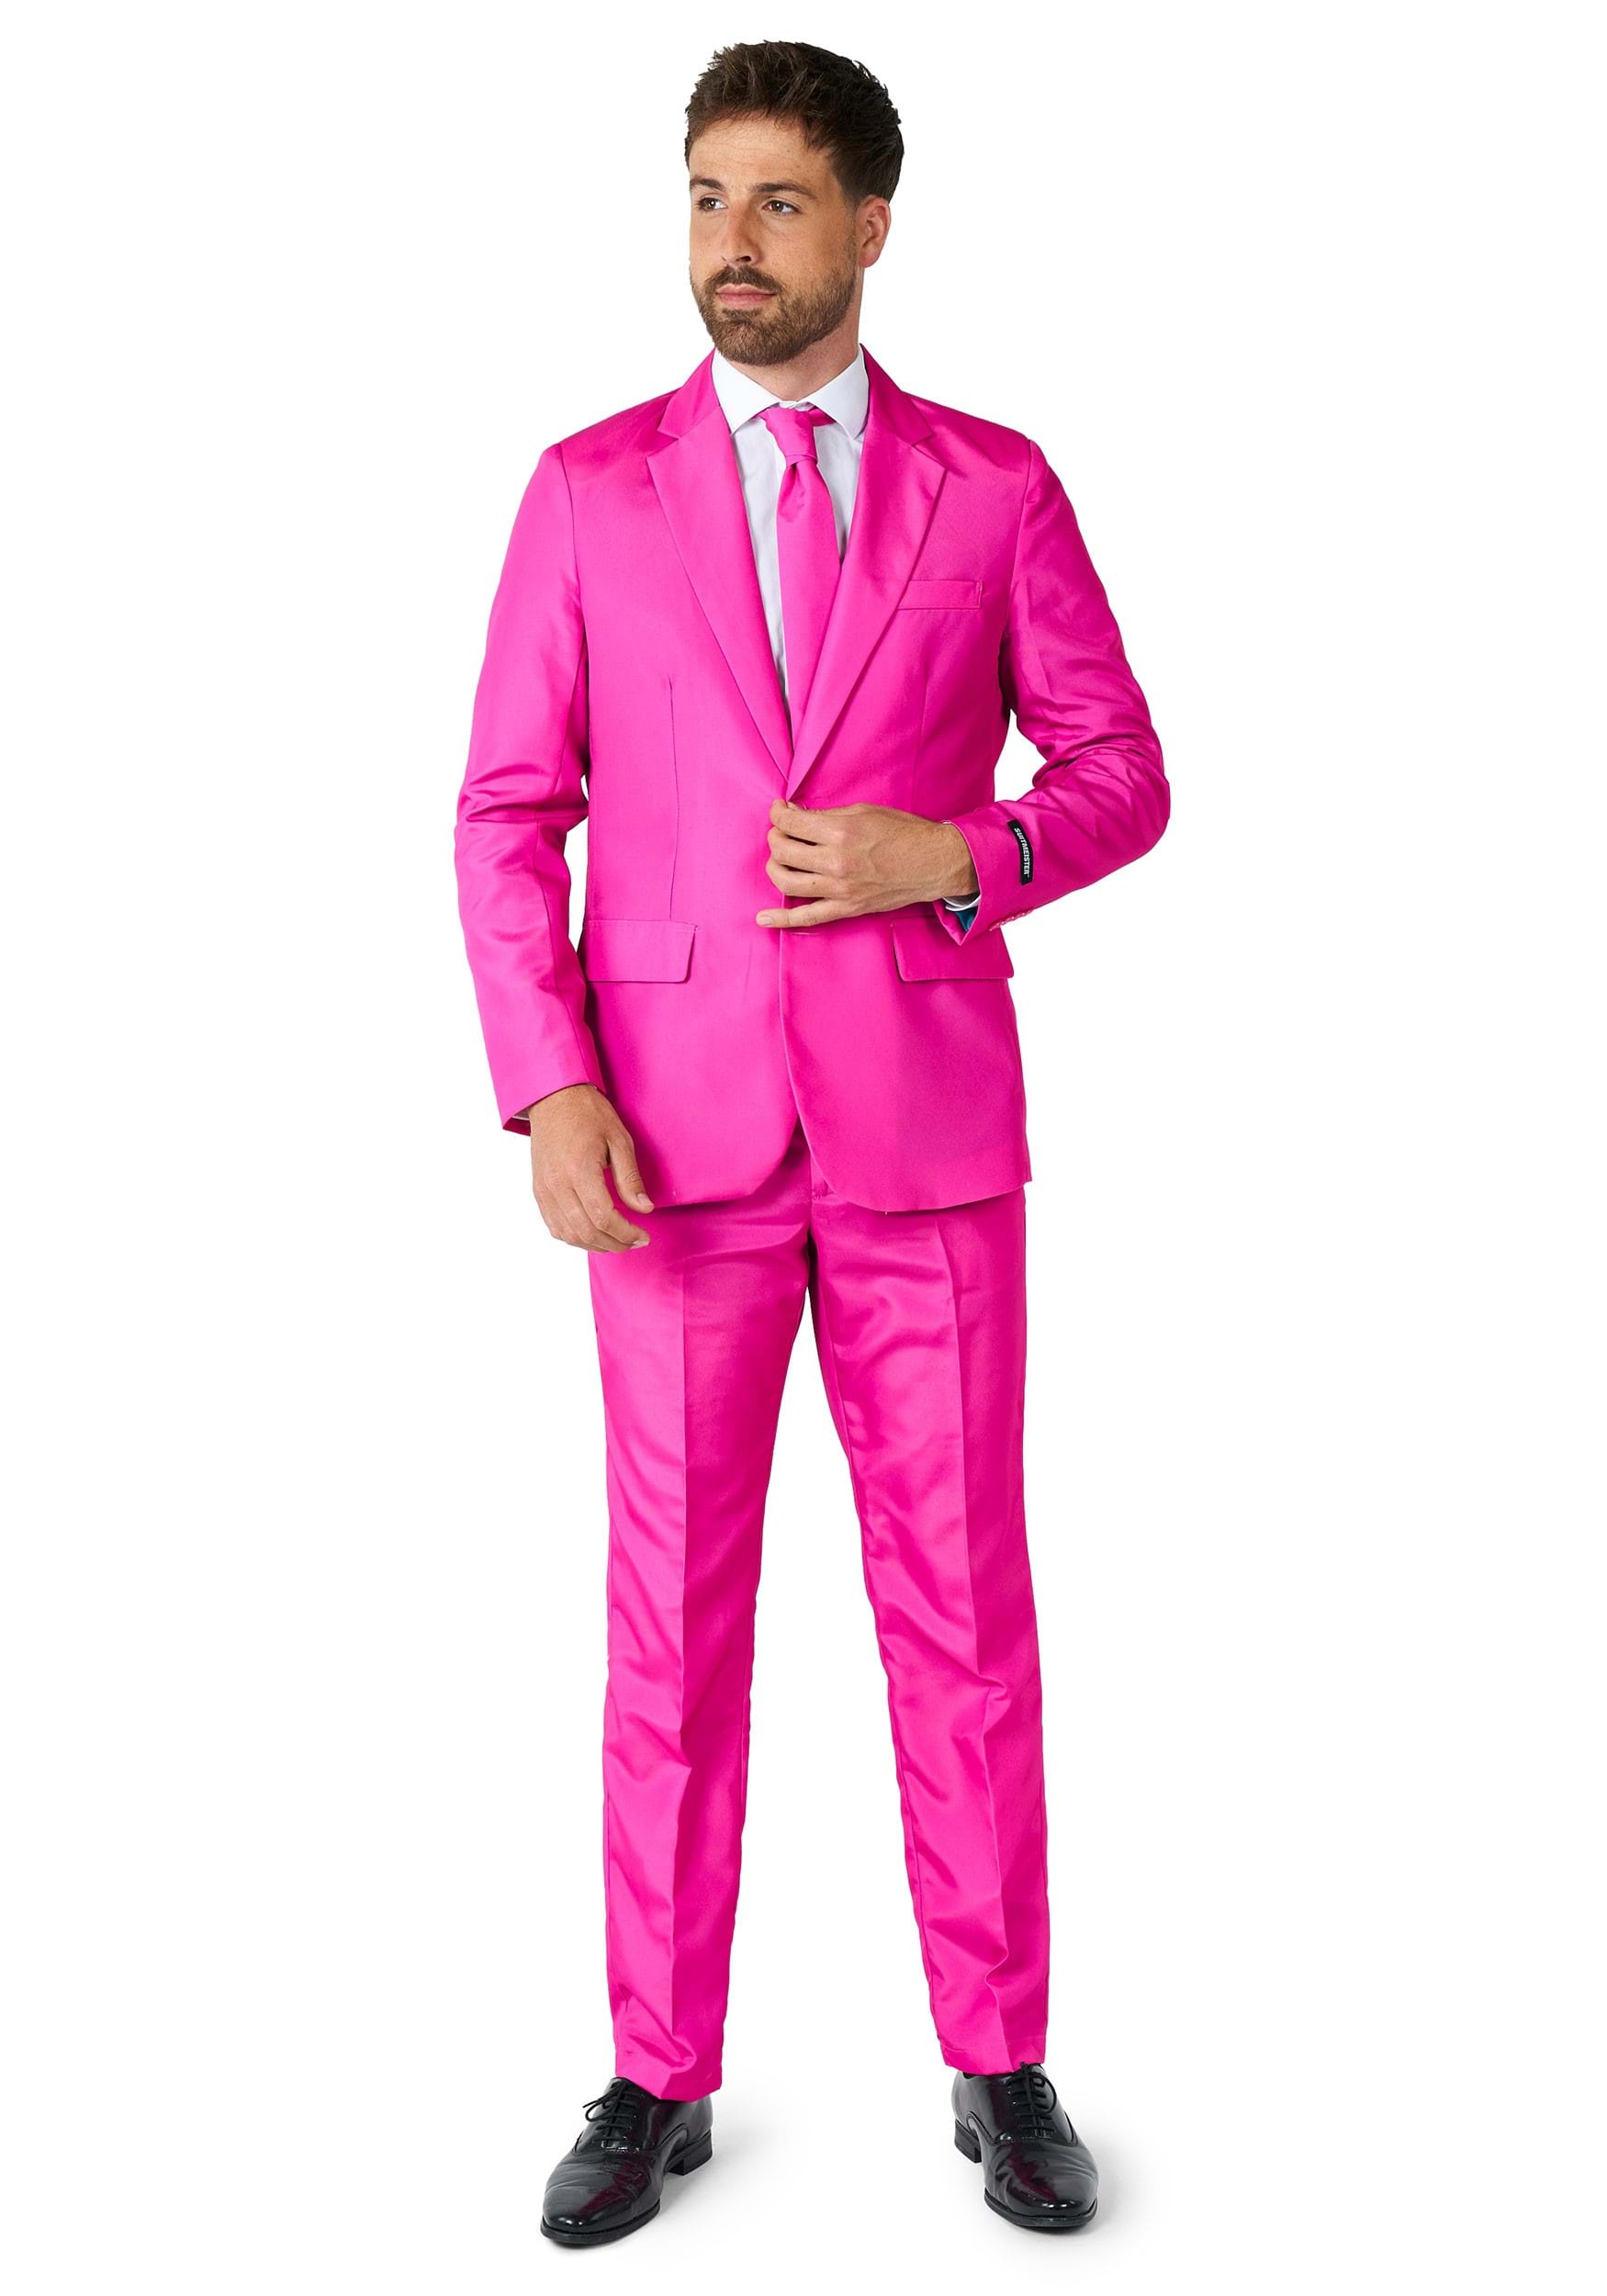 Image of Men's SuitMeister Basic Pink Suit Costume ID OSOBAS0006-S